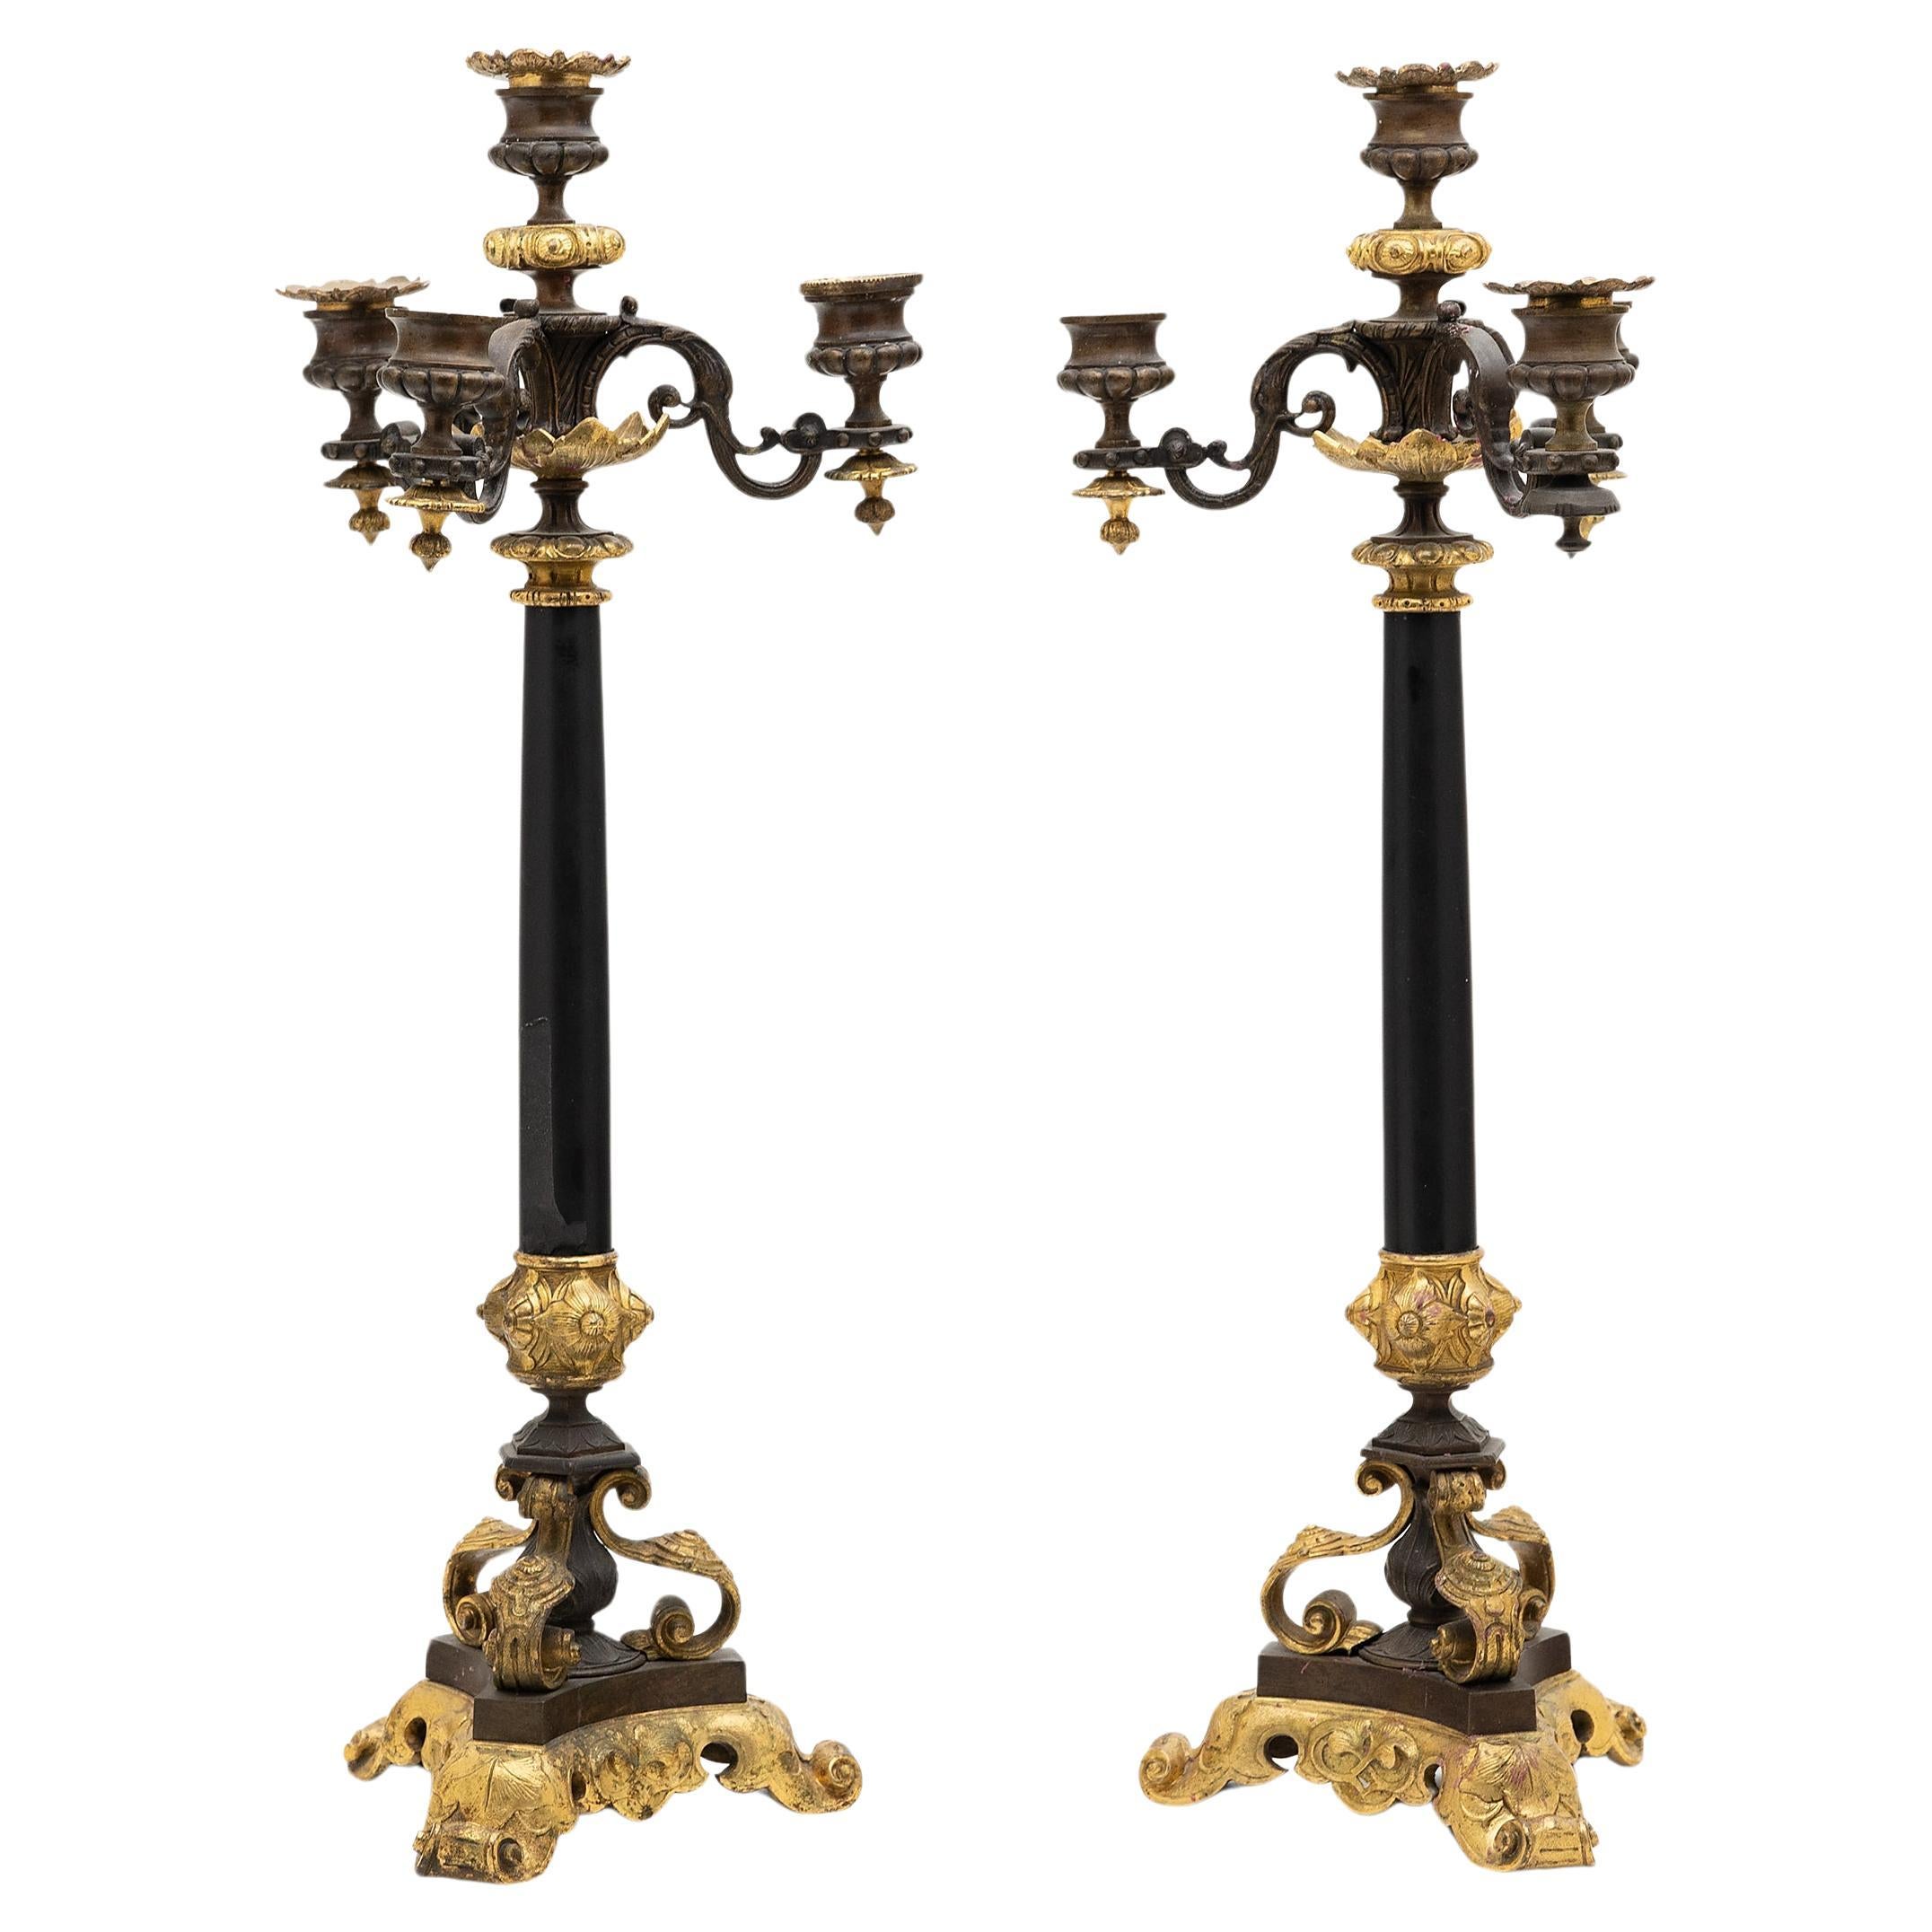 Pair of French Gilt Bronze and Slate Candelabras, c. 1850